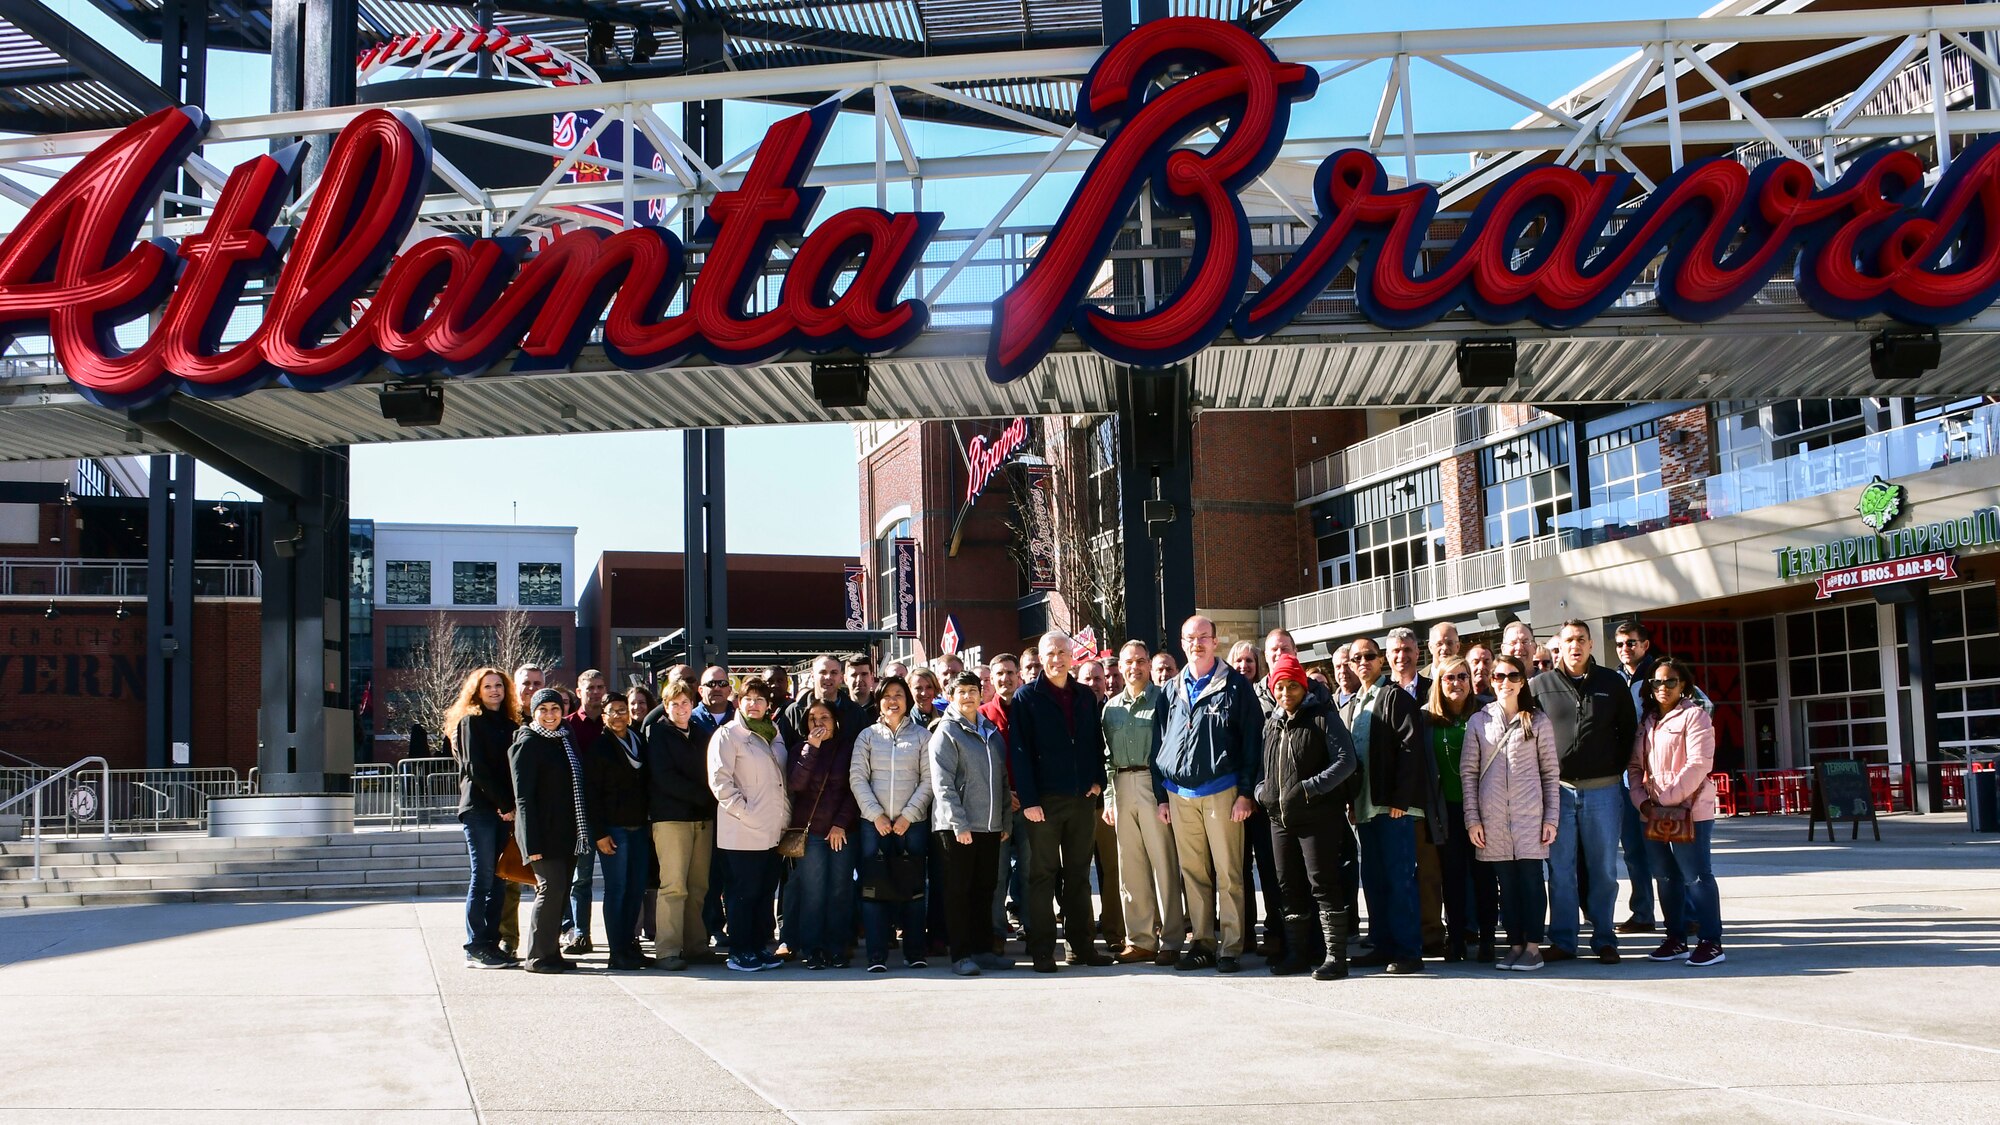 Twenty-Second Air Force Senior Leader Summit attendees pose in front of SunTrust Park prior to an evening team-building event in conjunction with the 22nd Air Force Senior Leader Summit March 15, 2018.